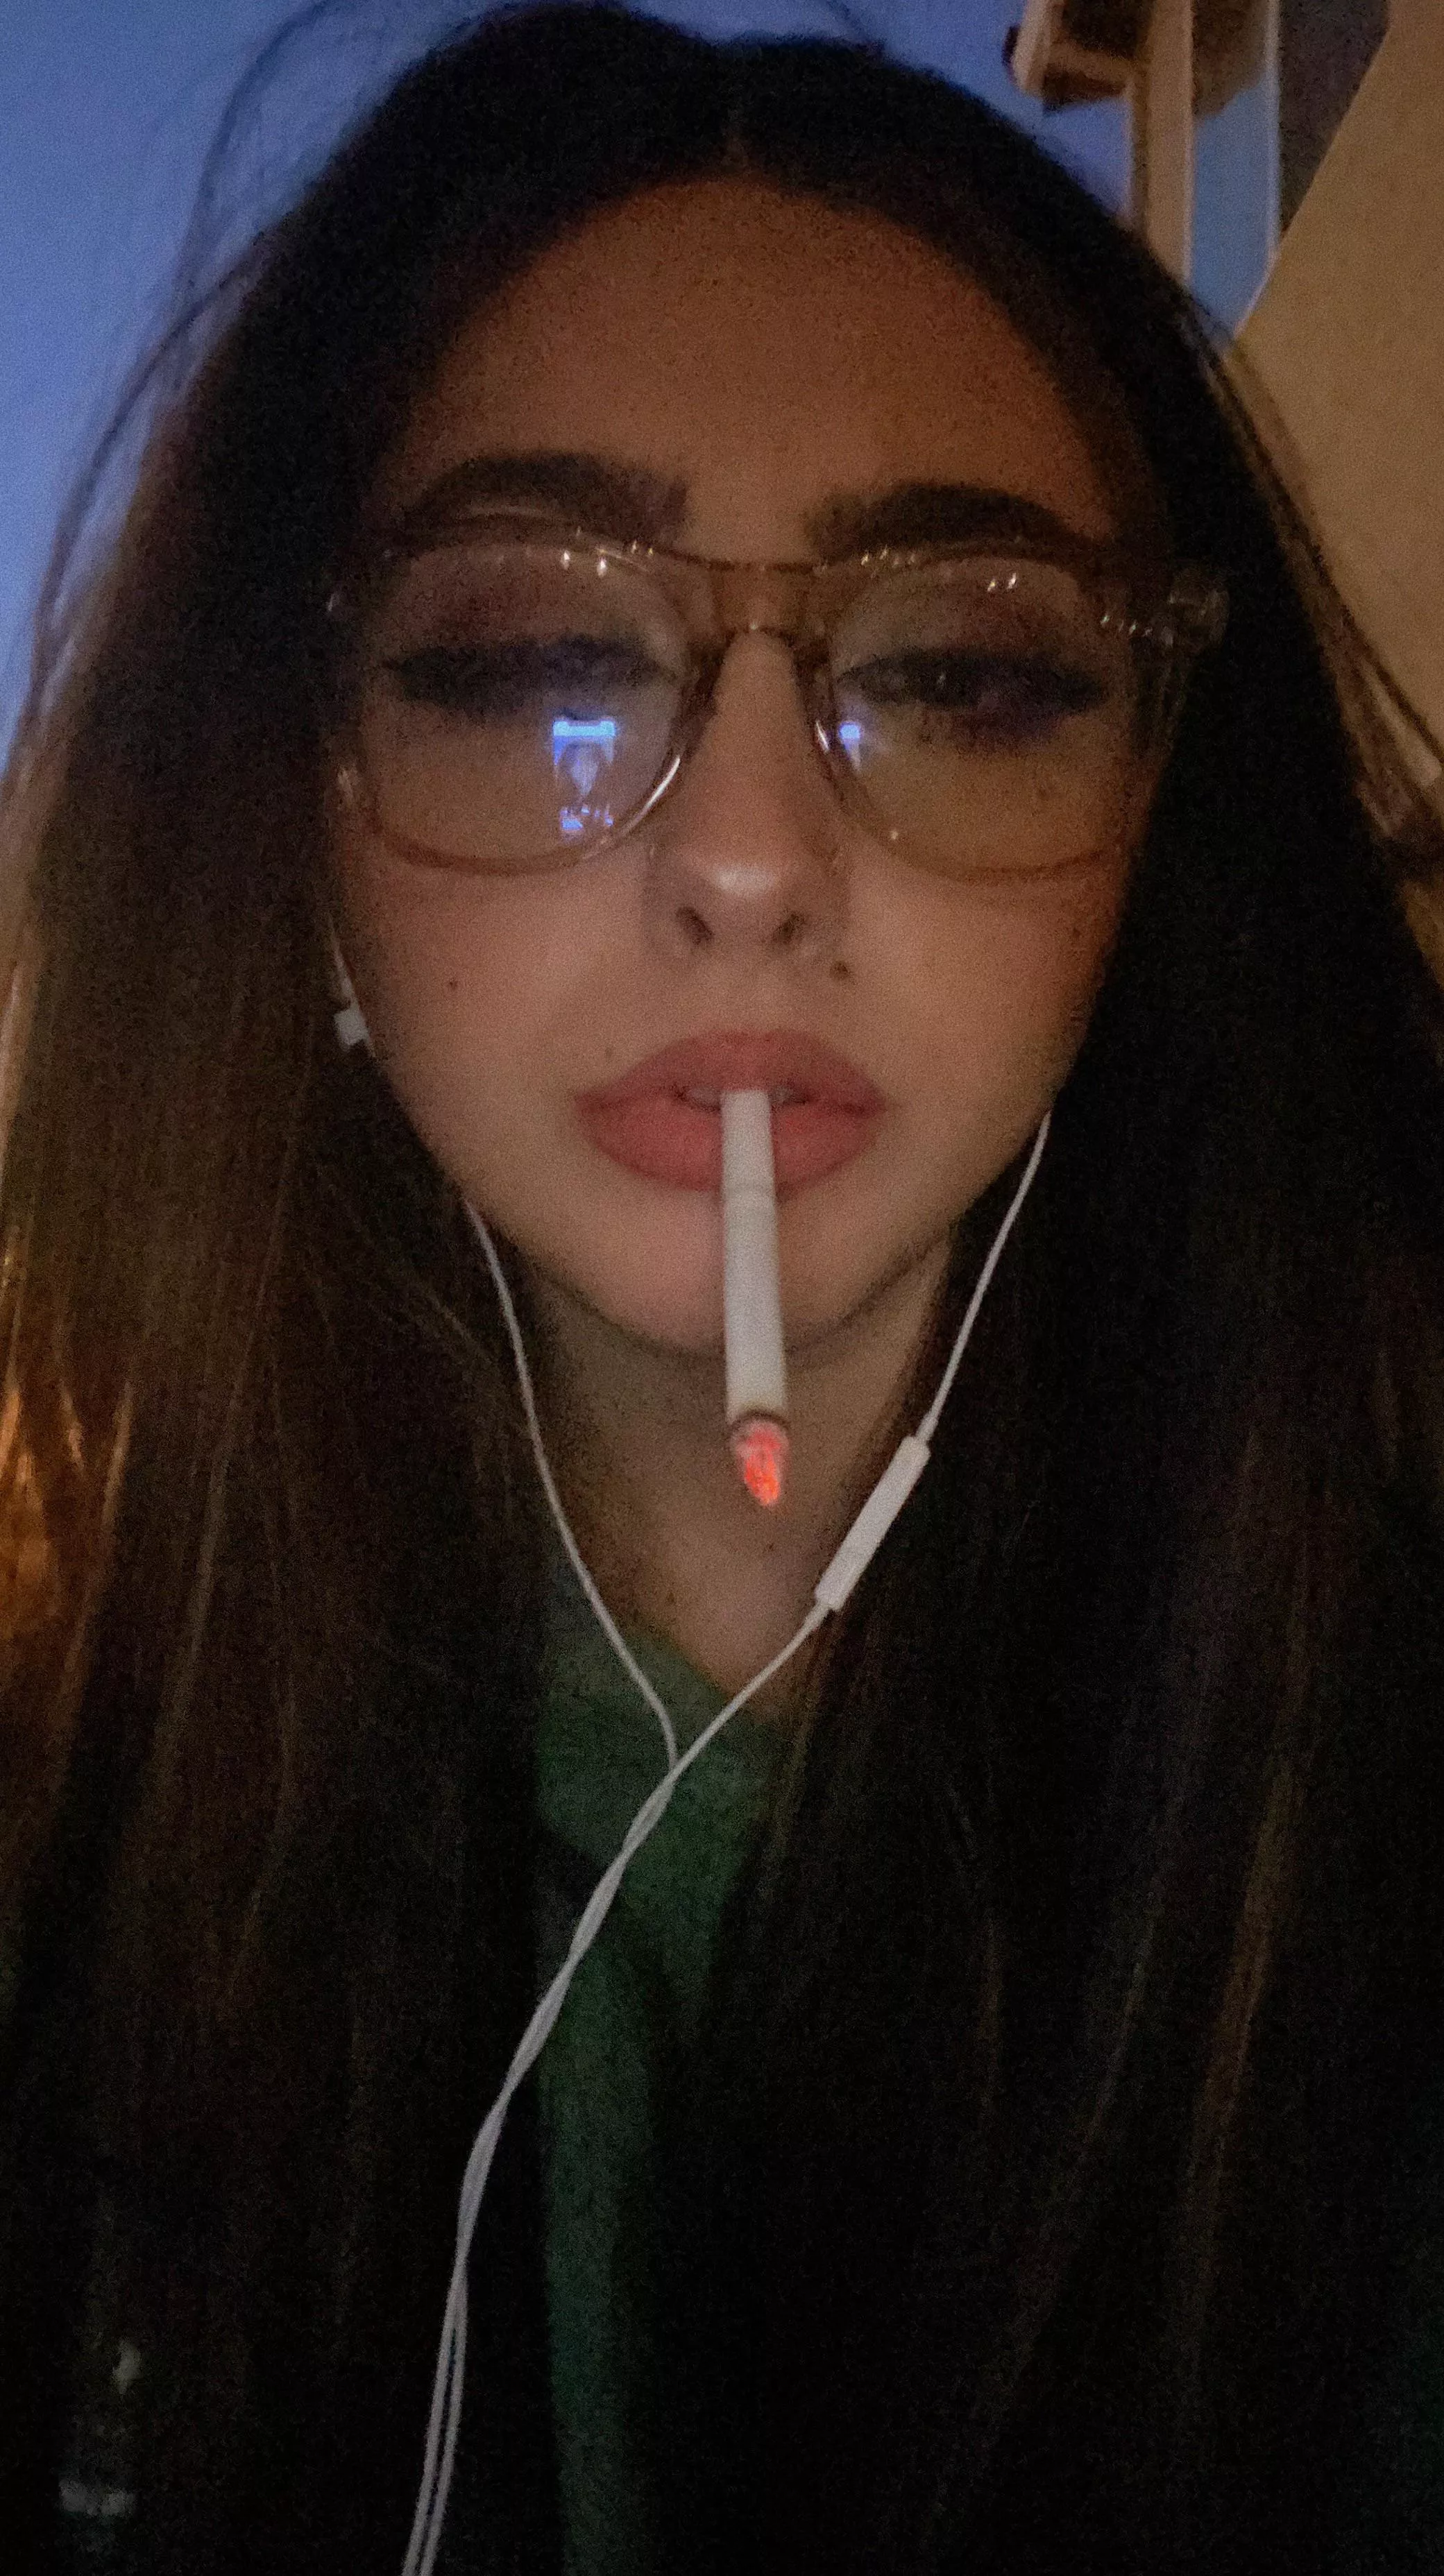 Would You Let Me Blow Smoke In Your Face Nudes Smokingfetish Nude Pics Org